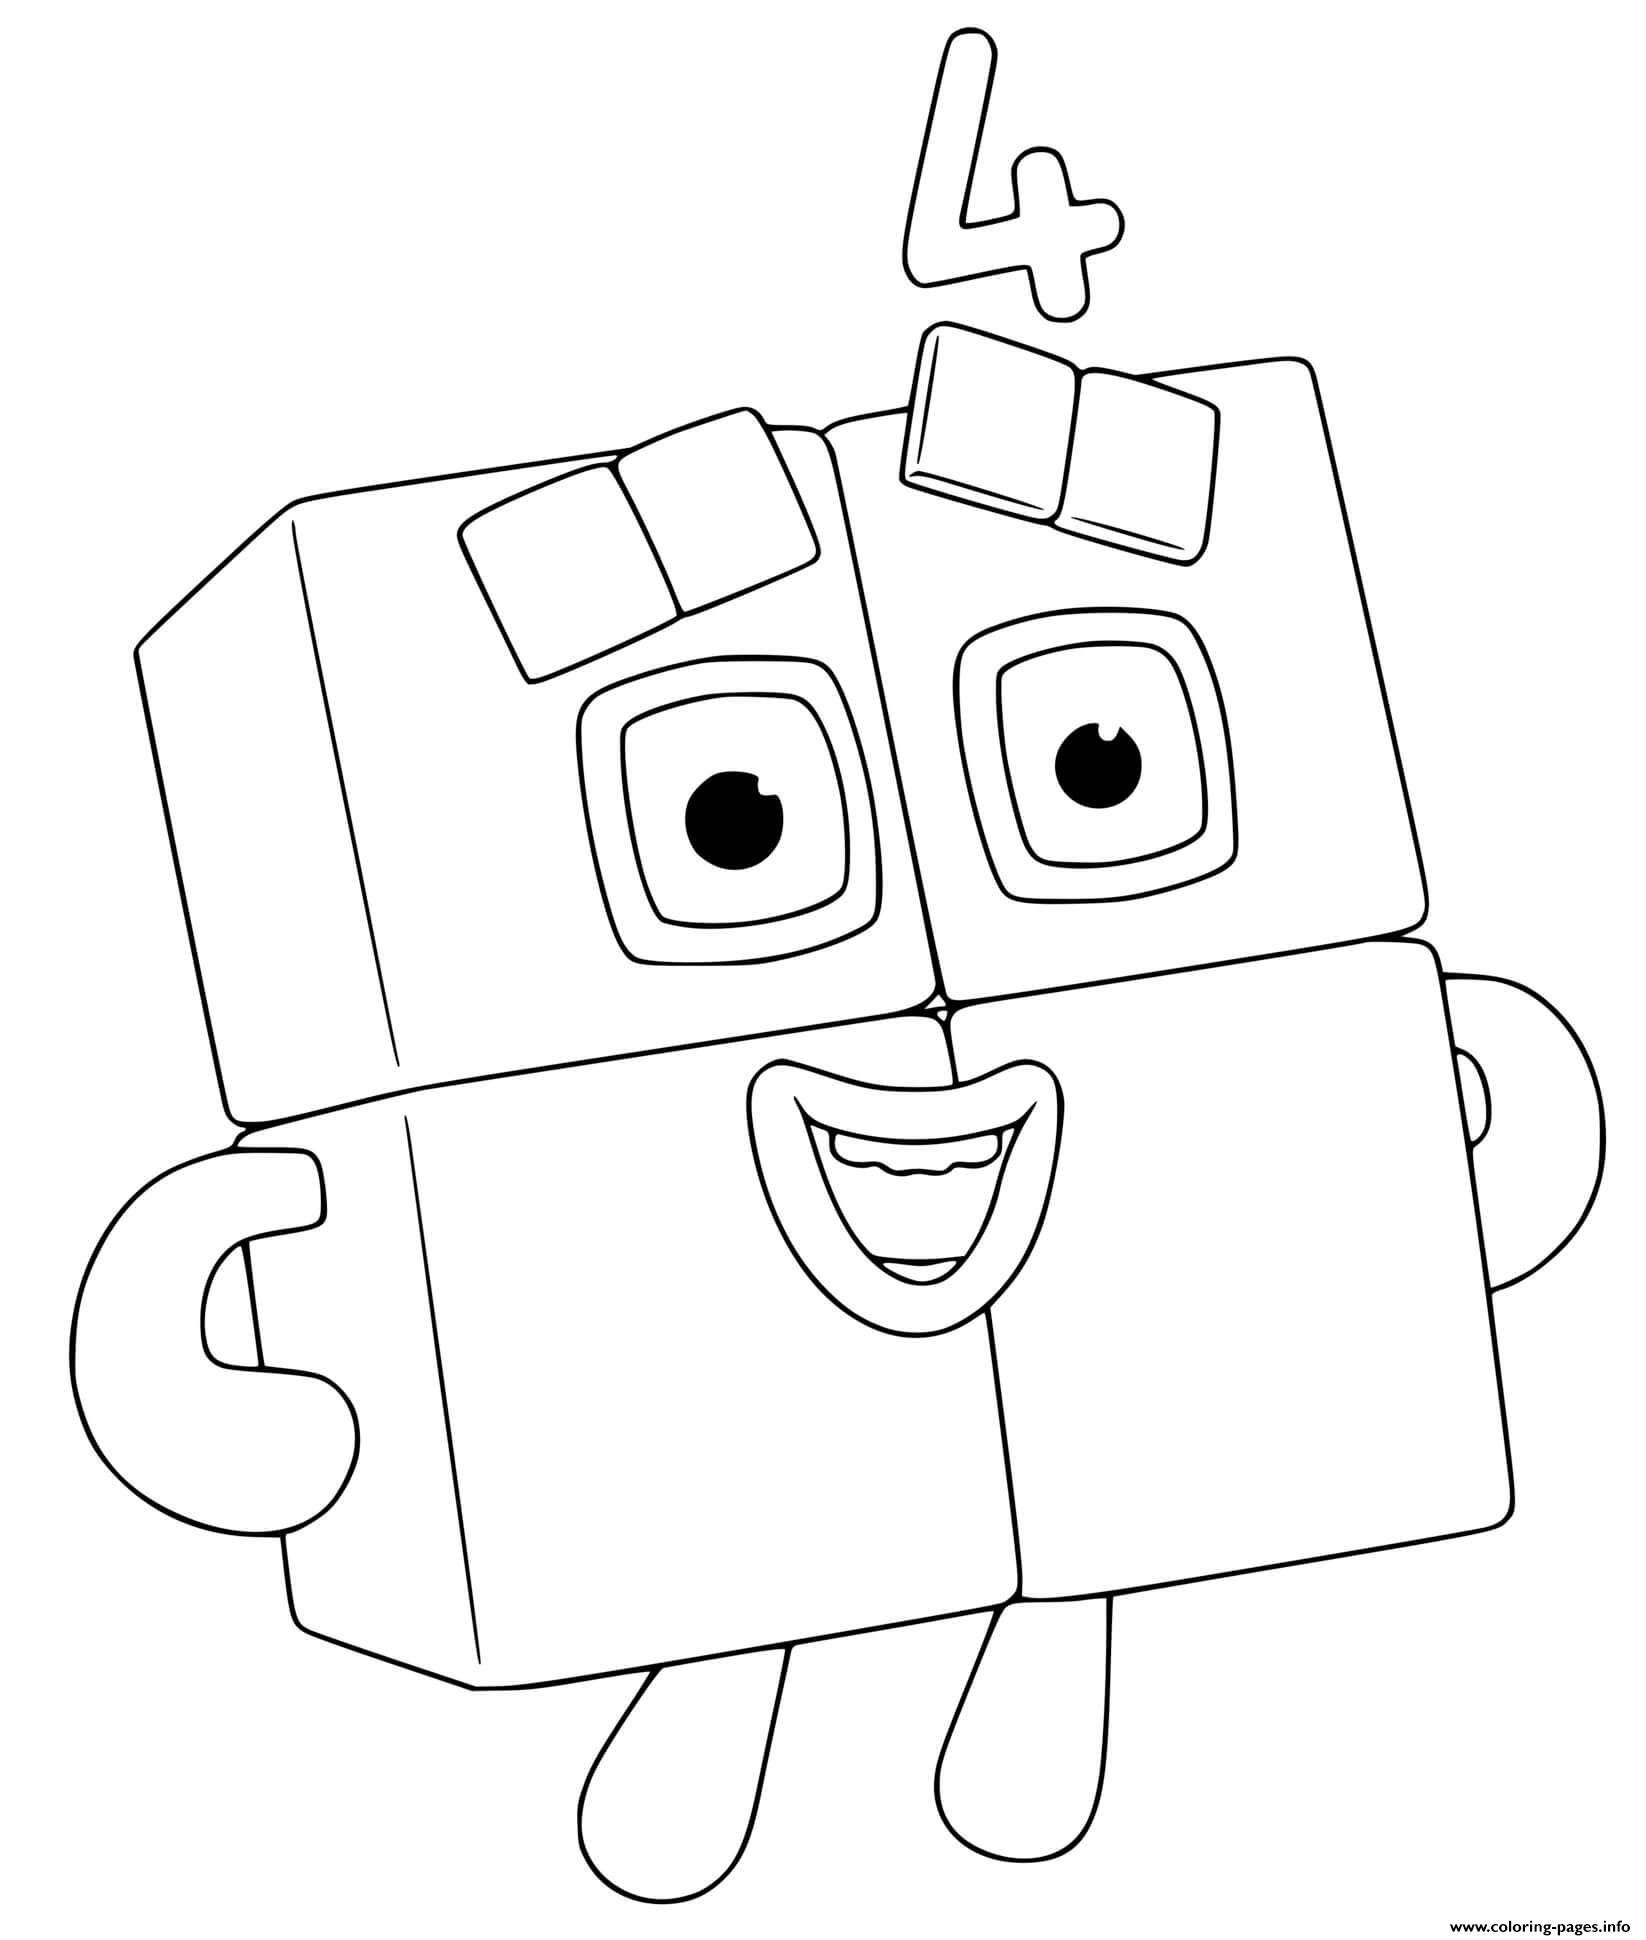 Free Printable Numberblocks Coloring Pages - Get Your Hands on Amazing ...